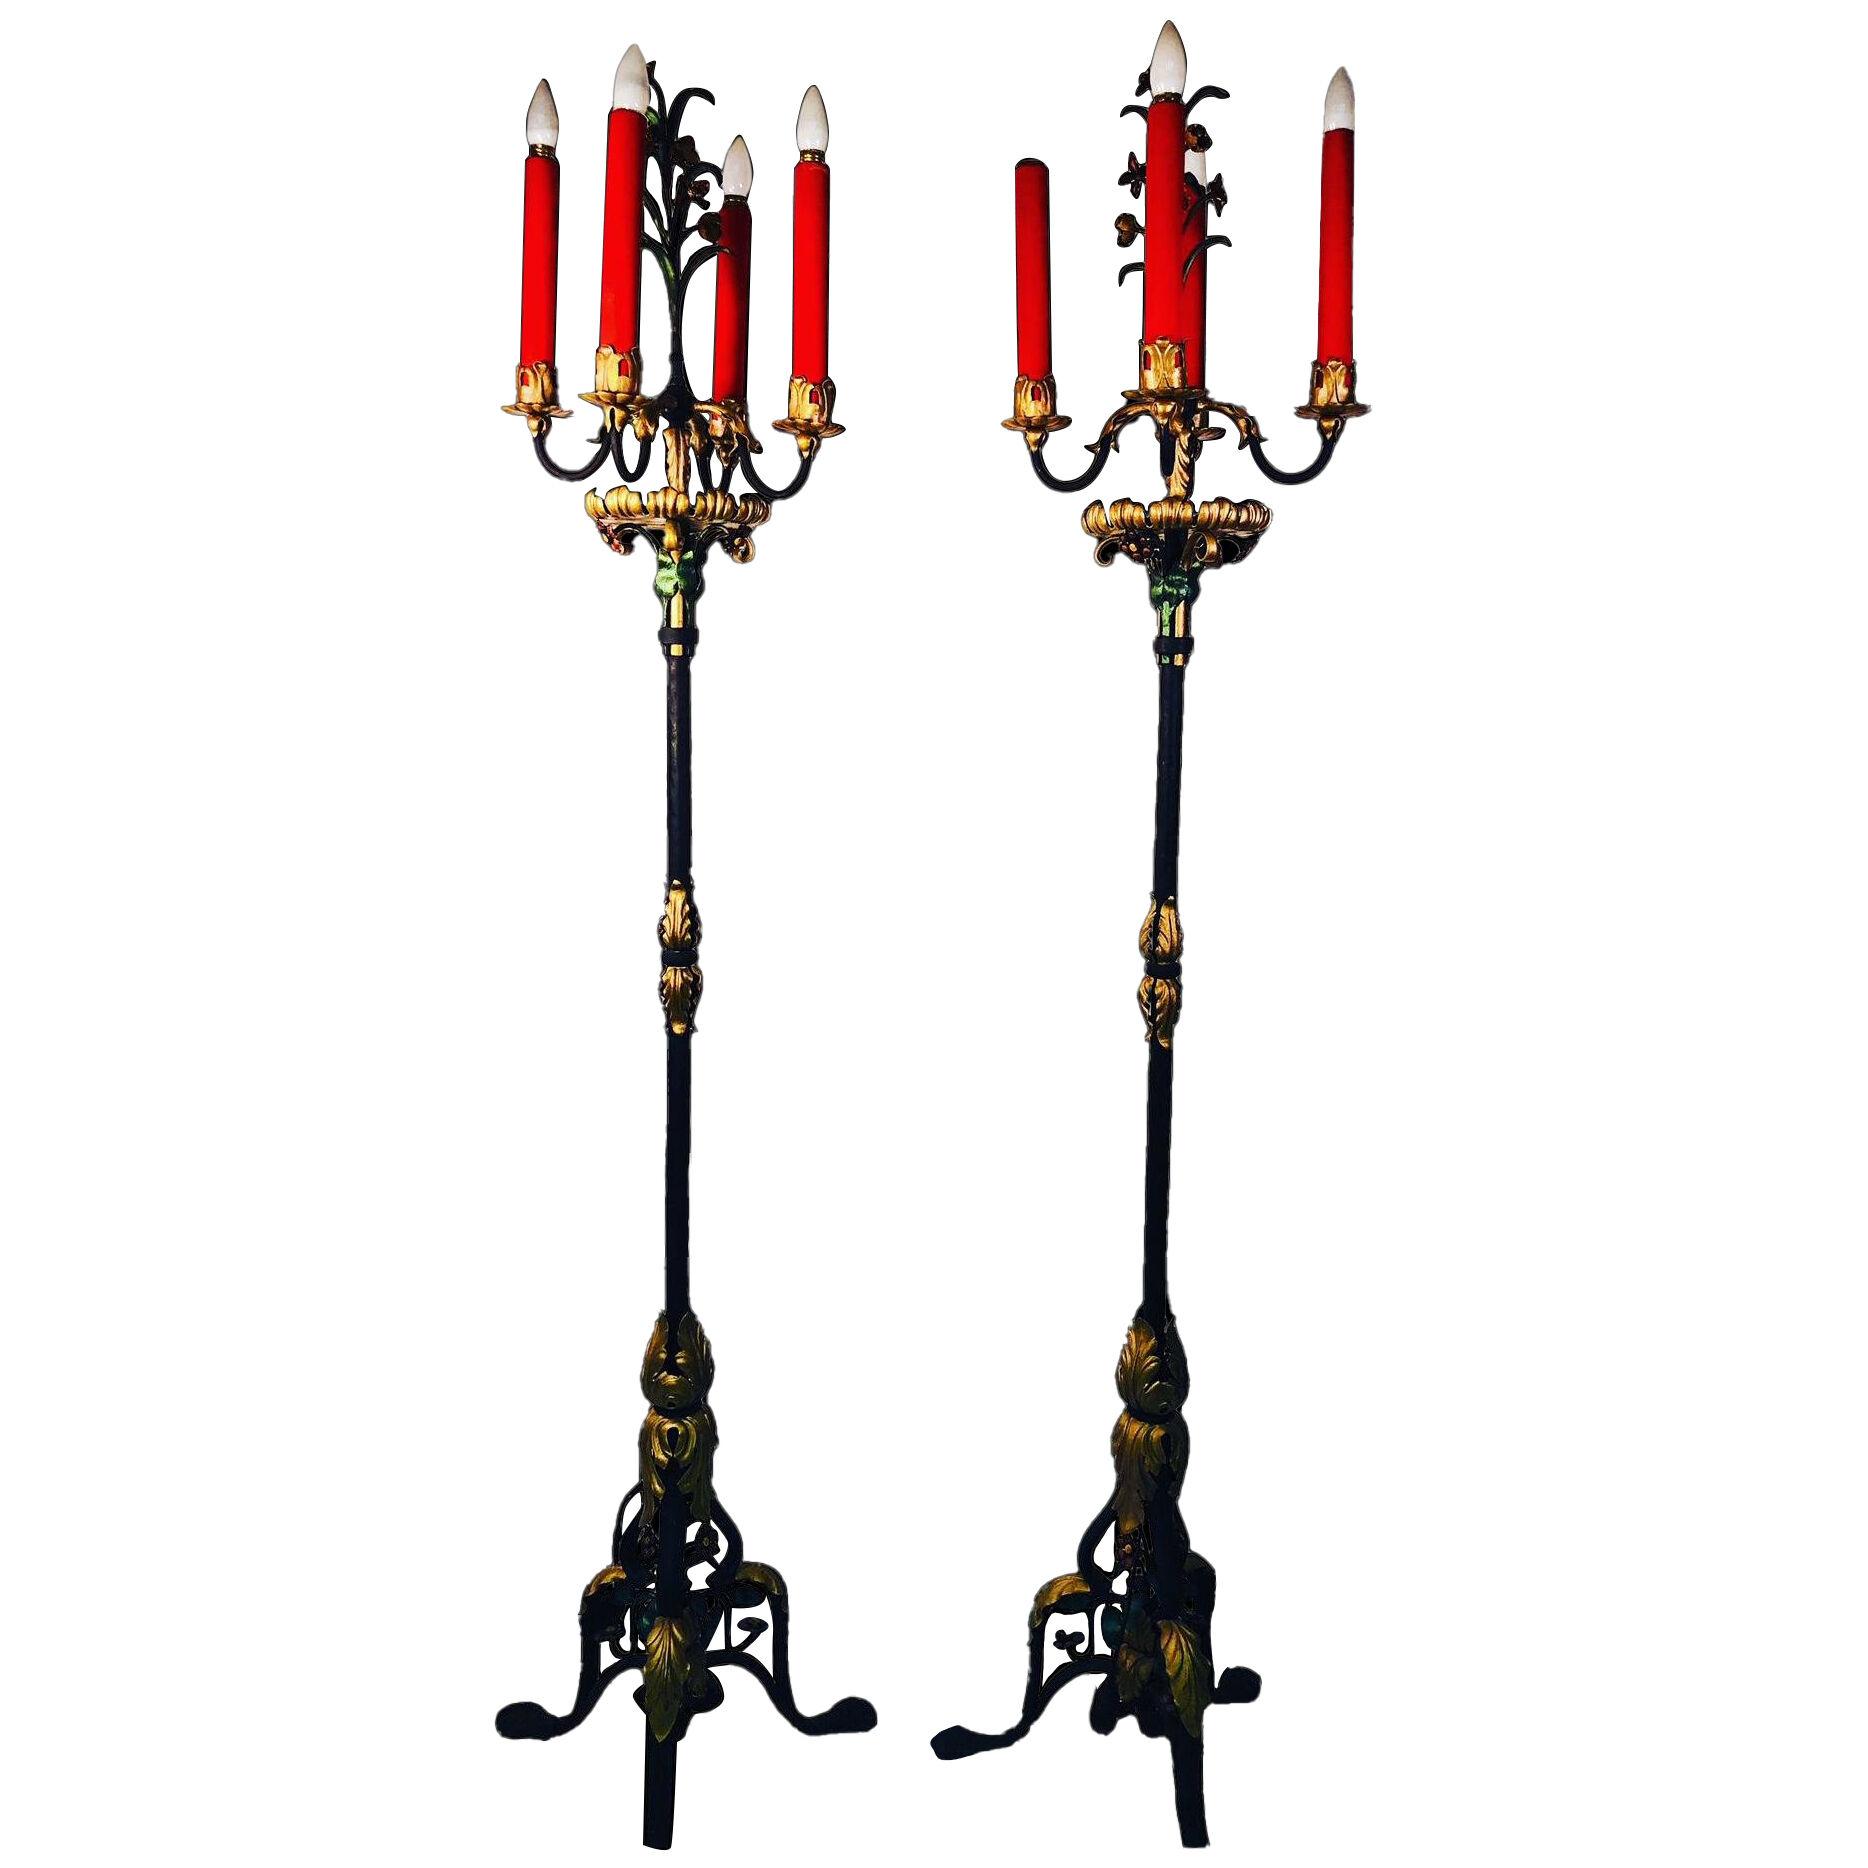 1930s Monumental Iron Candelabra Torchieres - a Pair